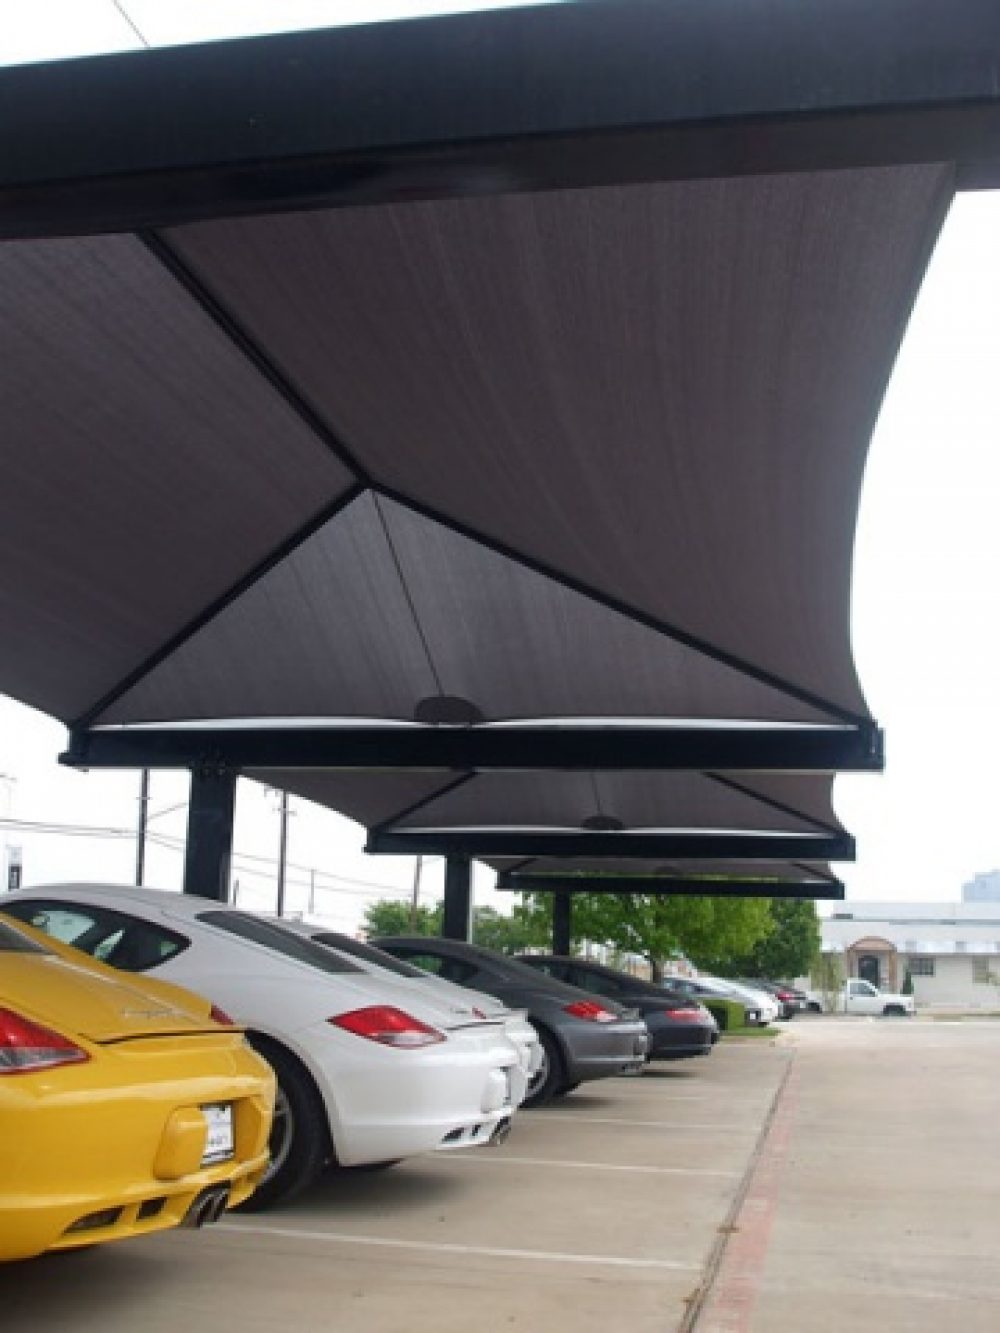 Covered Parking Structures and Walkways from Architectural Fabrication